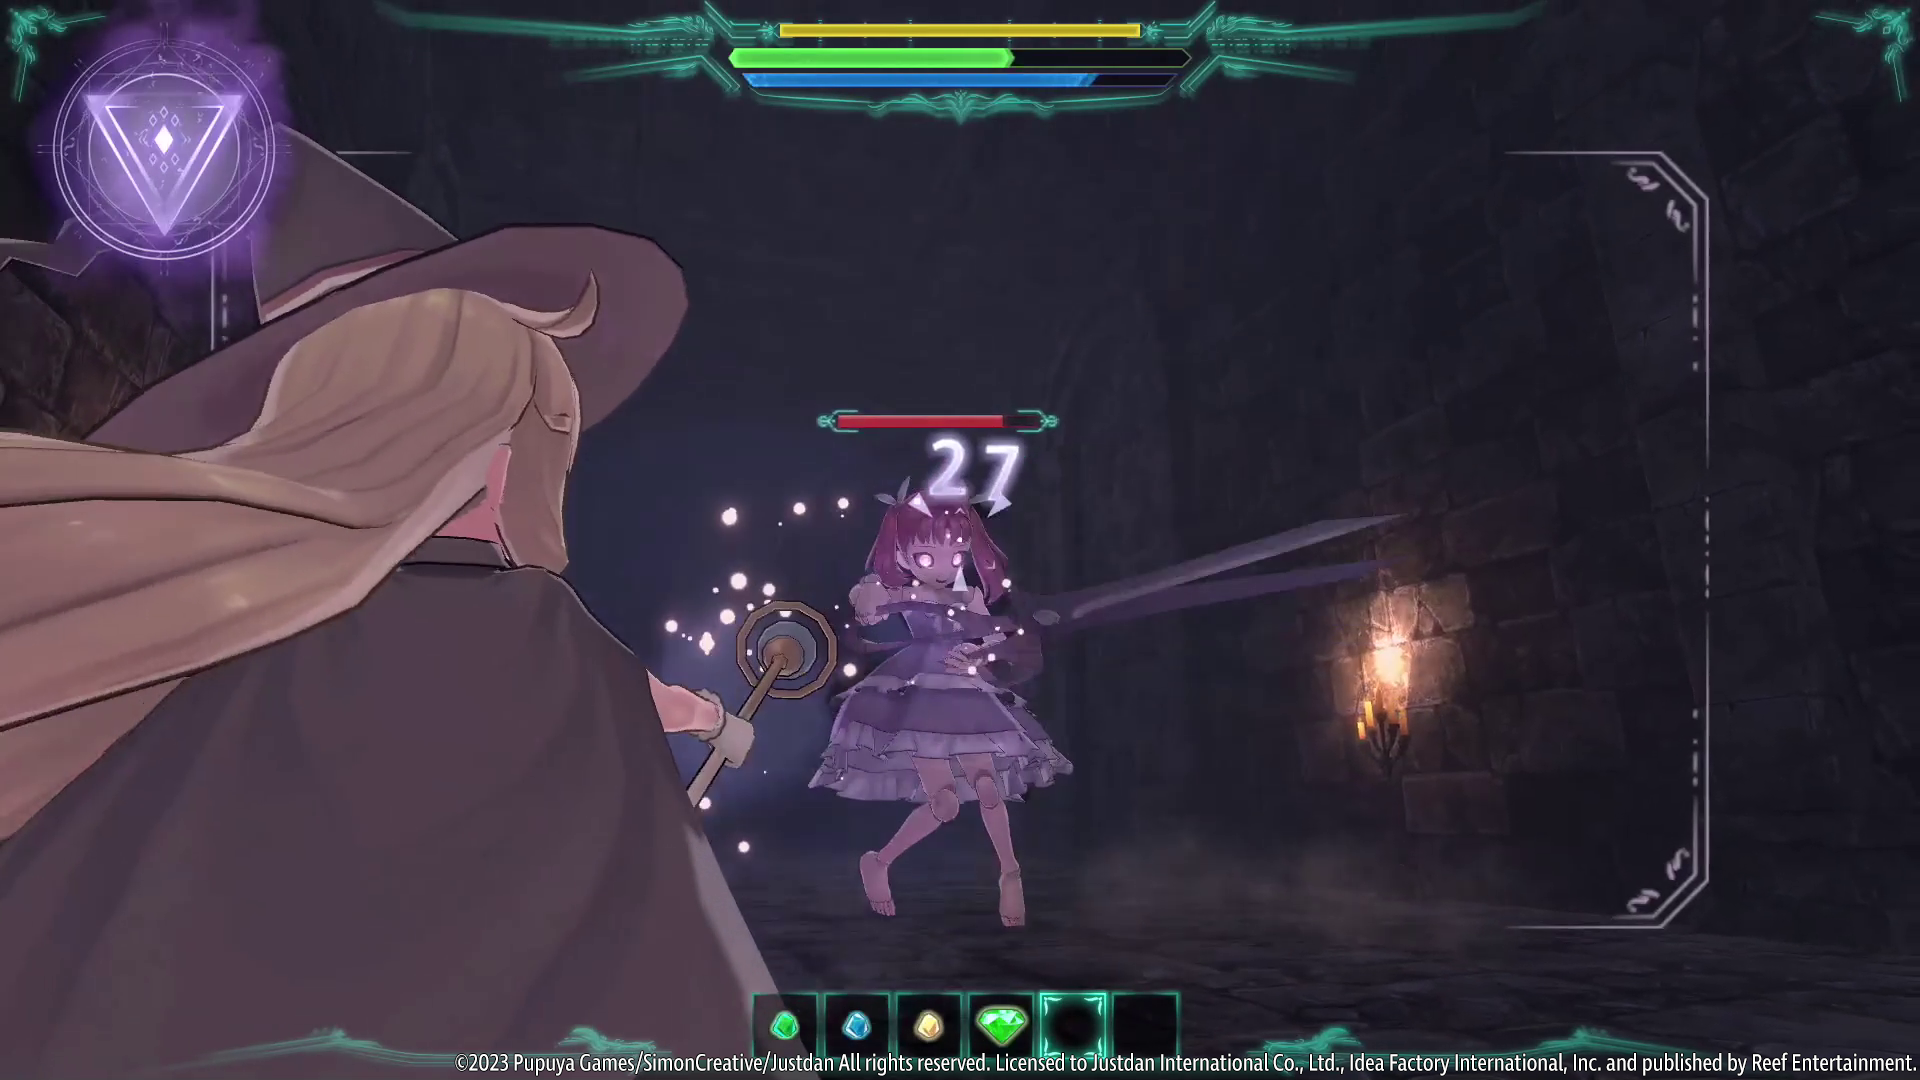 Little Witch Nobeta aiming at an enemy